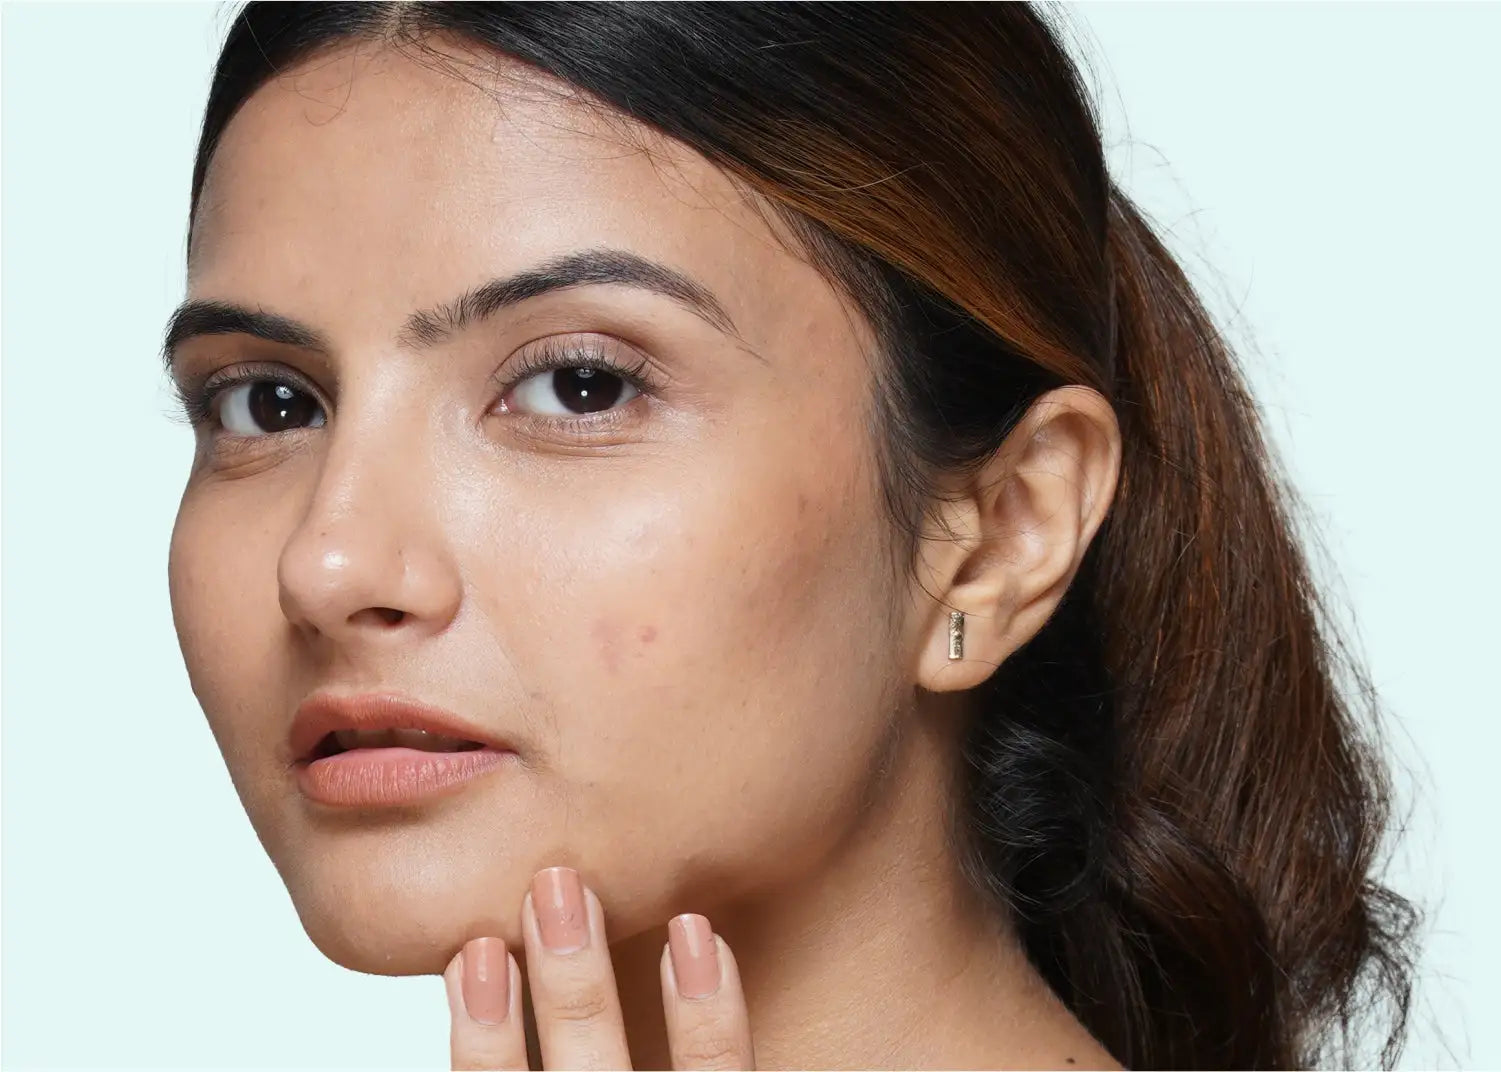 How to remove pimple marks overnight?